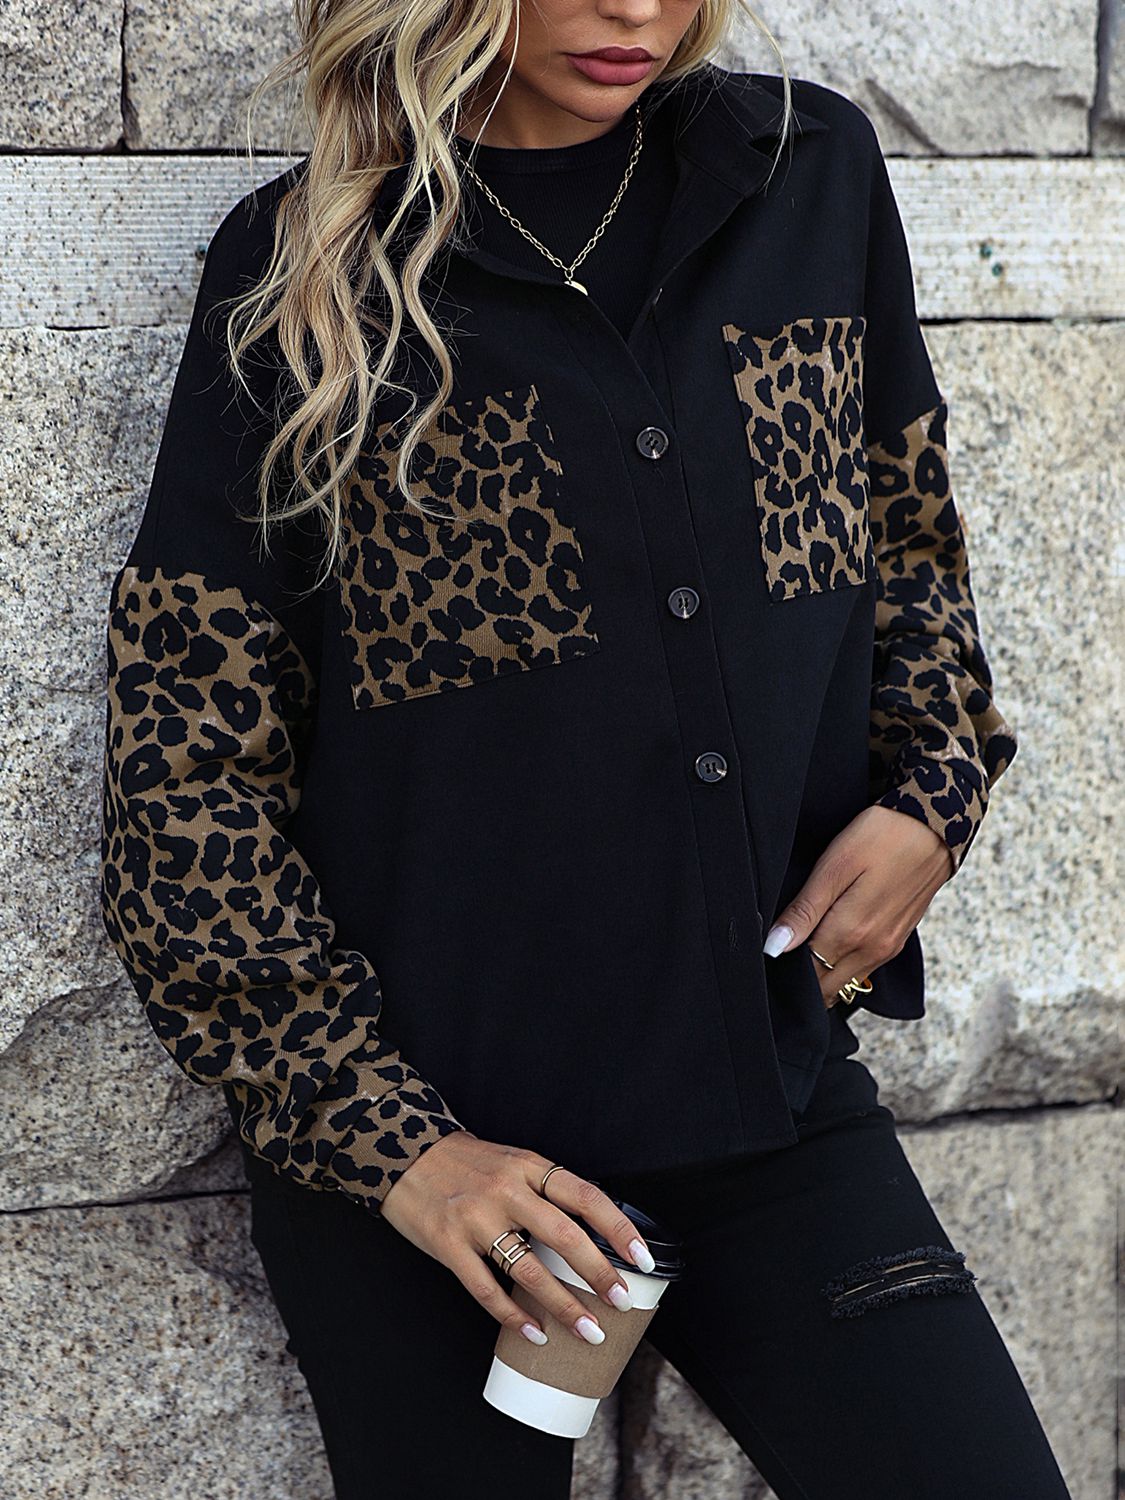 Leopard Print Buttoned Dropped Shoulder Jacket The Stout Steer